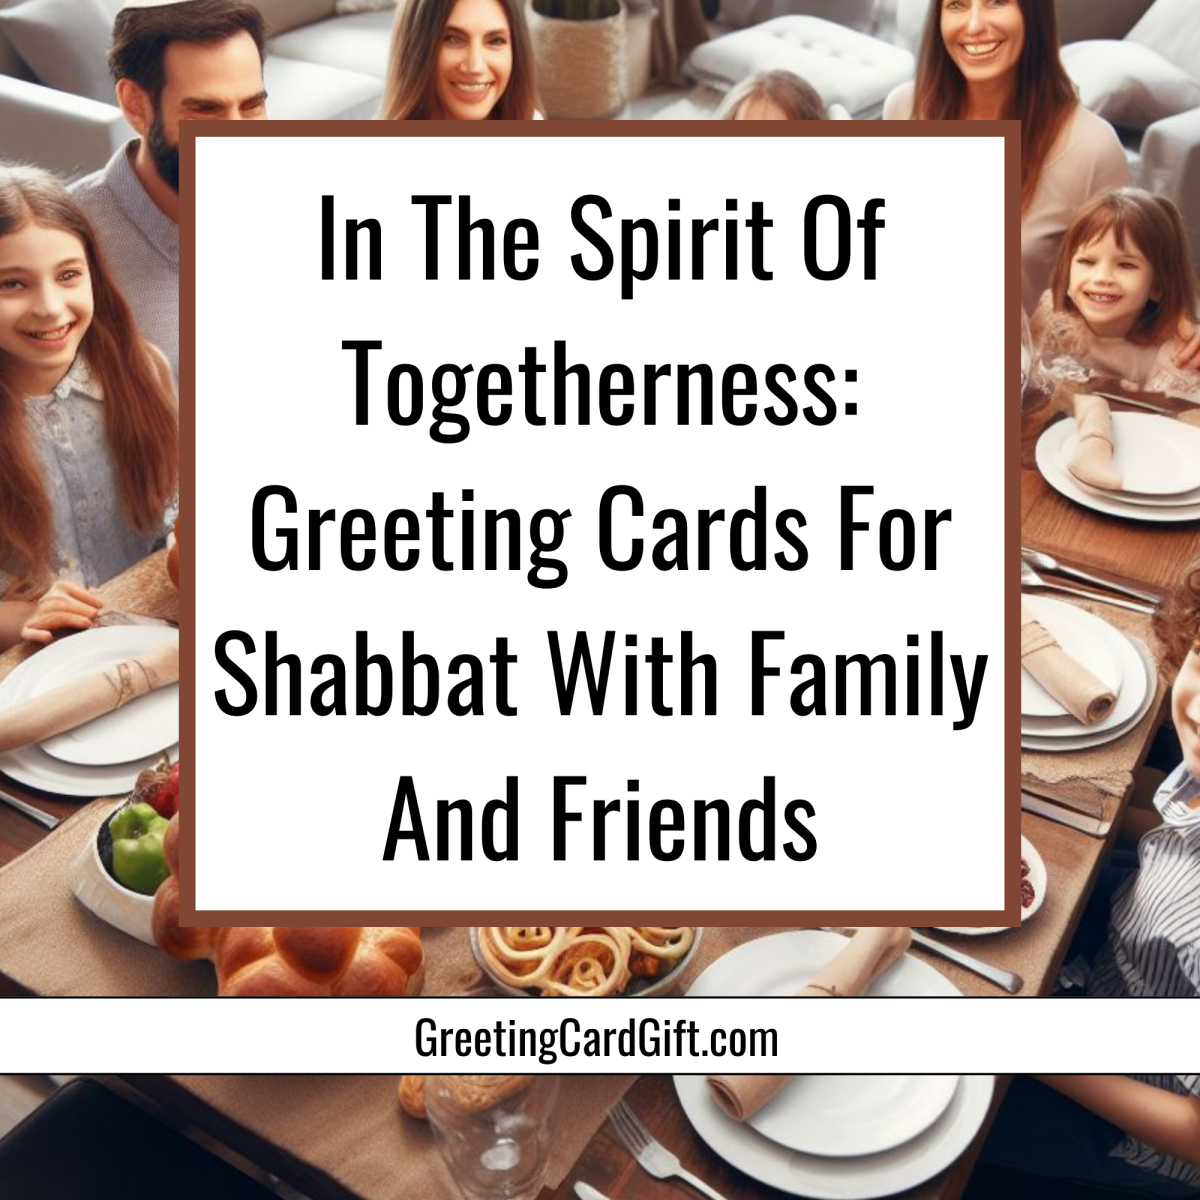 In The Spirit Of Togetherness: Greeting Cards For Shabbat With Family And Friends